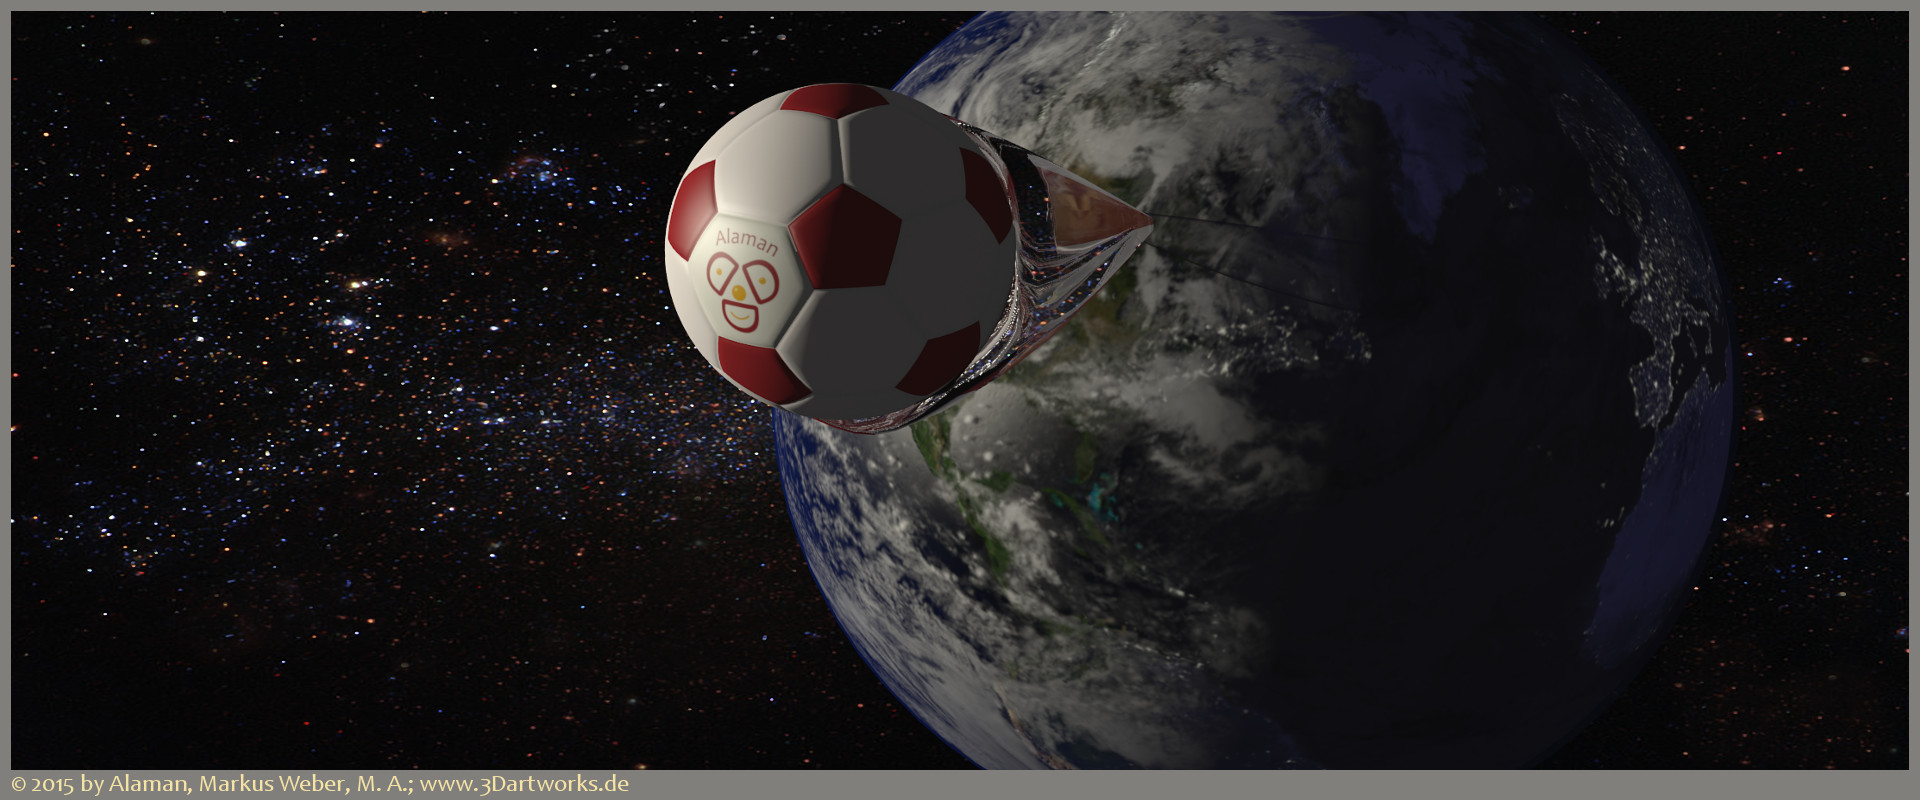 Product visualization: earth and classic football being launched into space from Canada